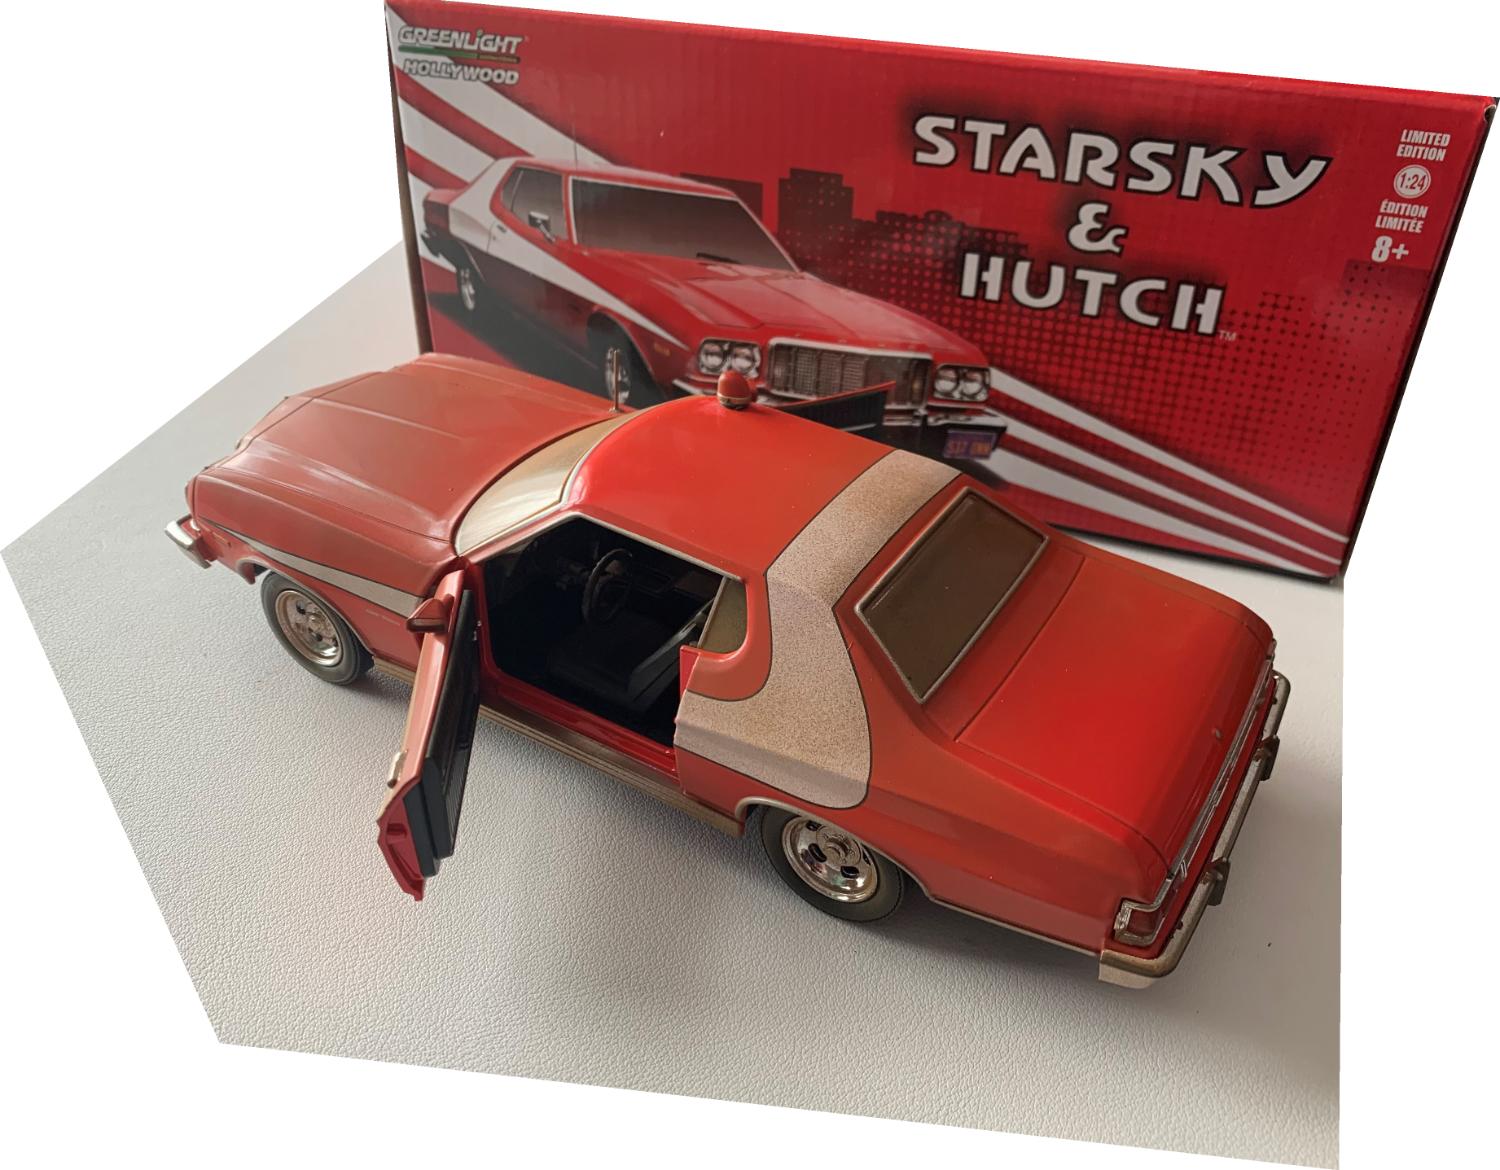 Starsky and Hutch Ford Gran Torino 1976 Weathered Version in red / white 1:24 scale model from Greenlight